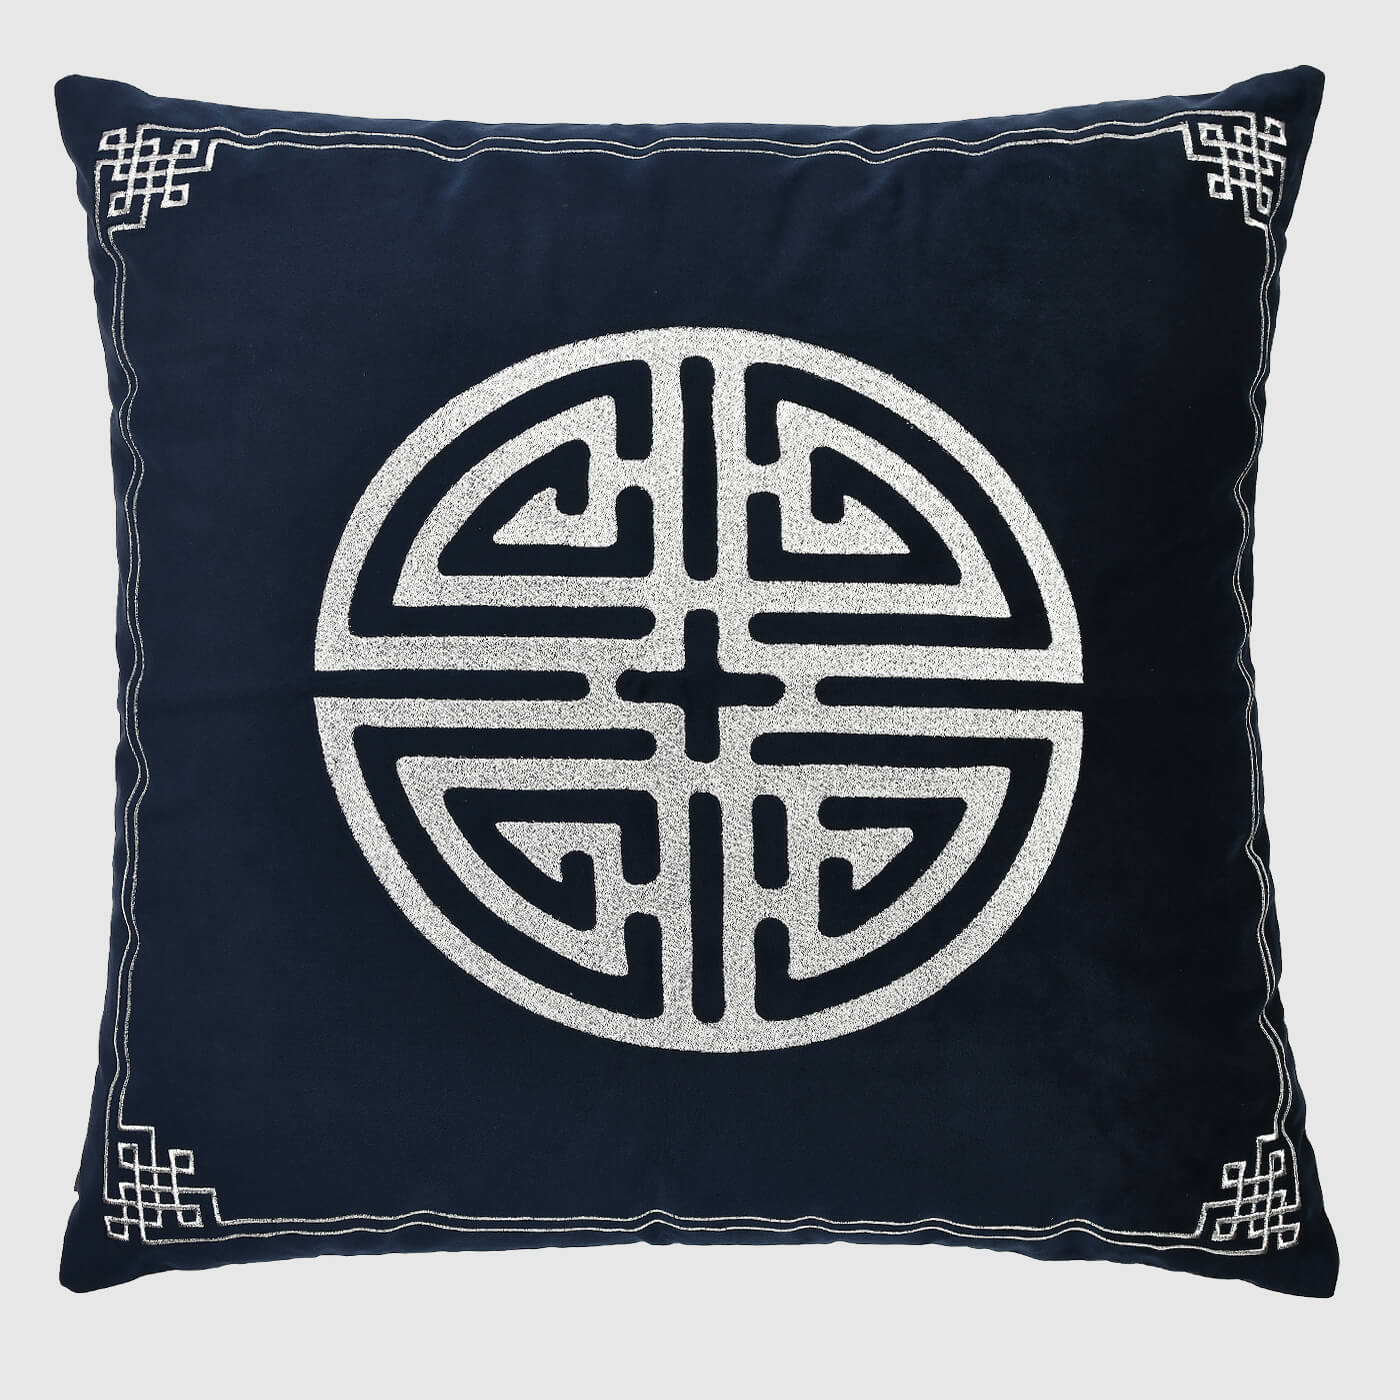 Prosperity Pillow Cover - Pillow Covers